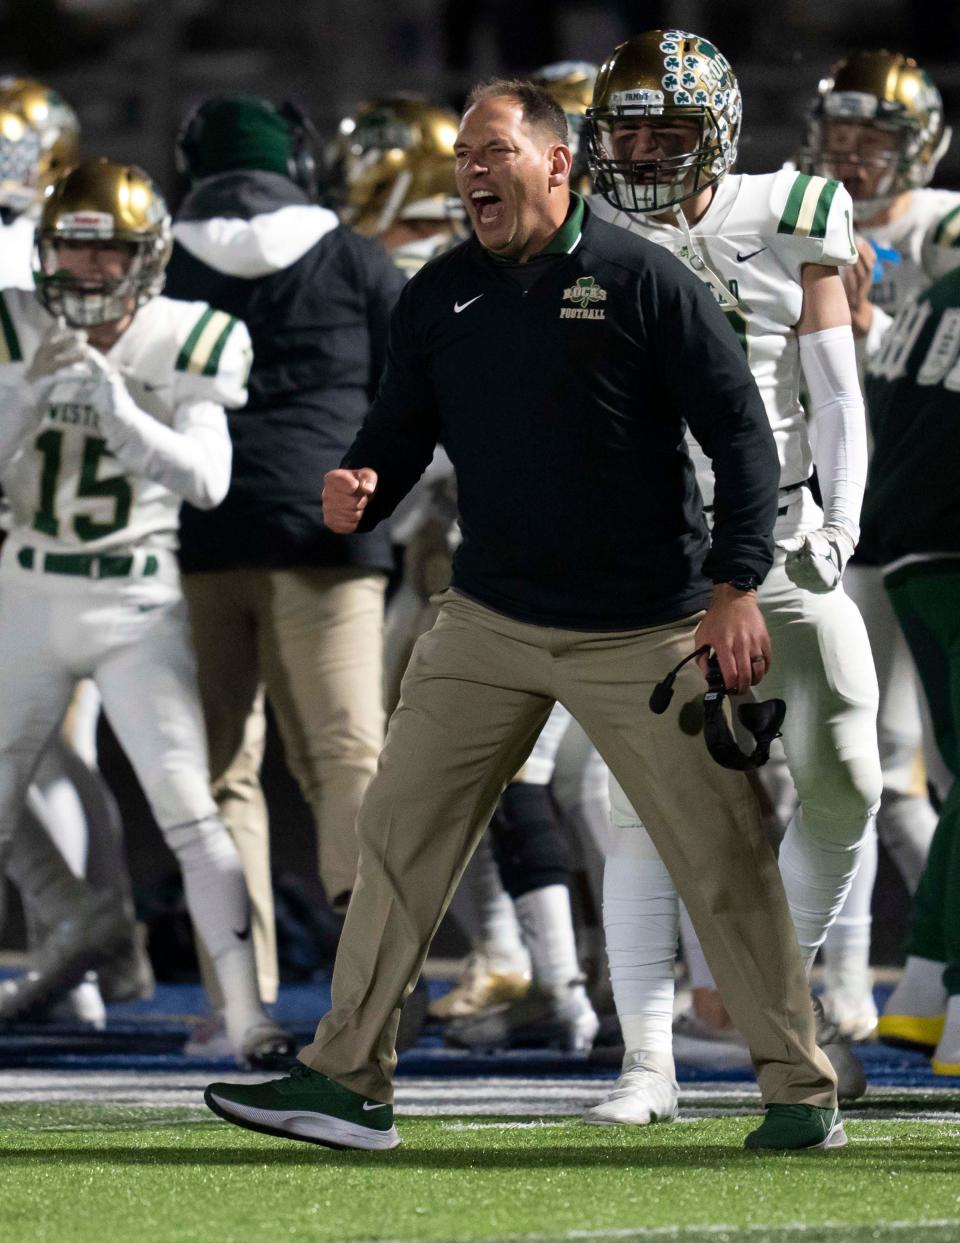 Westfield Shamrock head coach Jake Gilbert celebrates a turnover on downs Friday, Nov. 11, 2022, at Hamilton Southeastern High School in Fishers. 